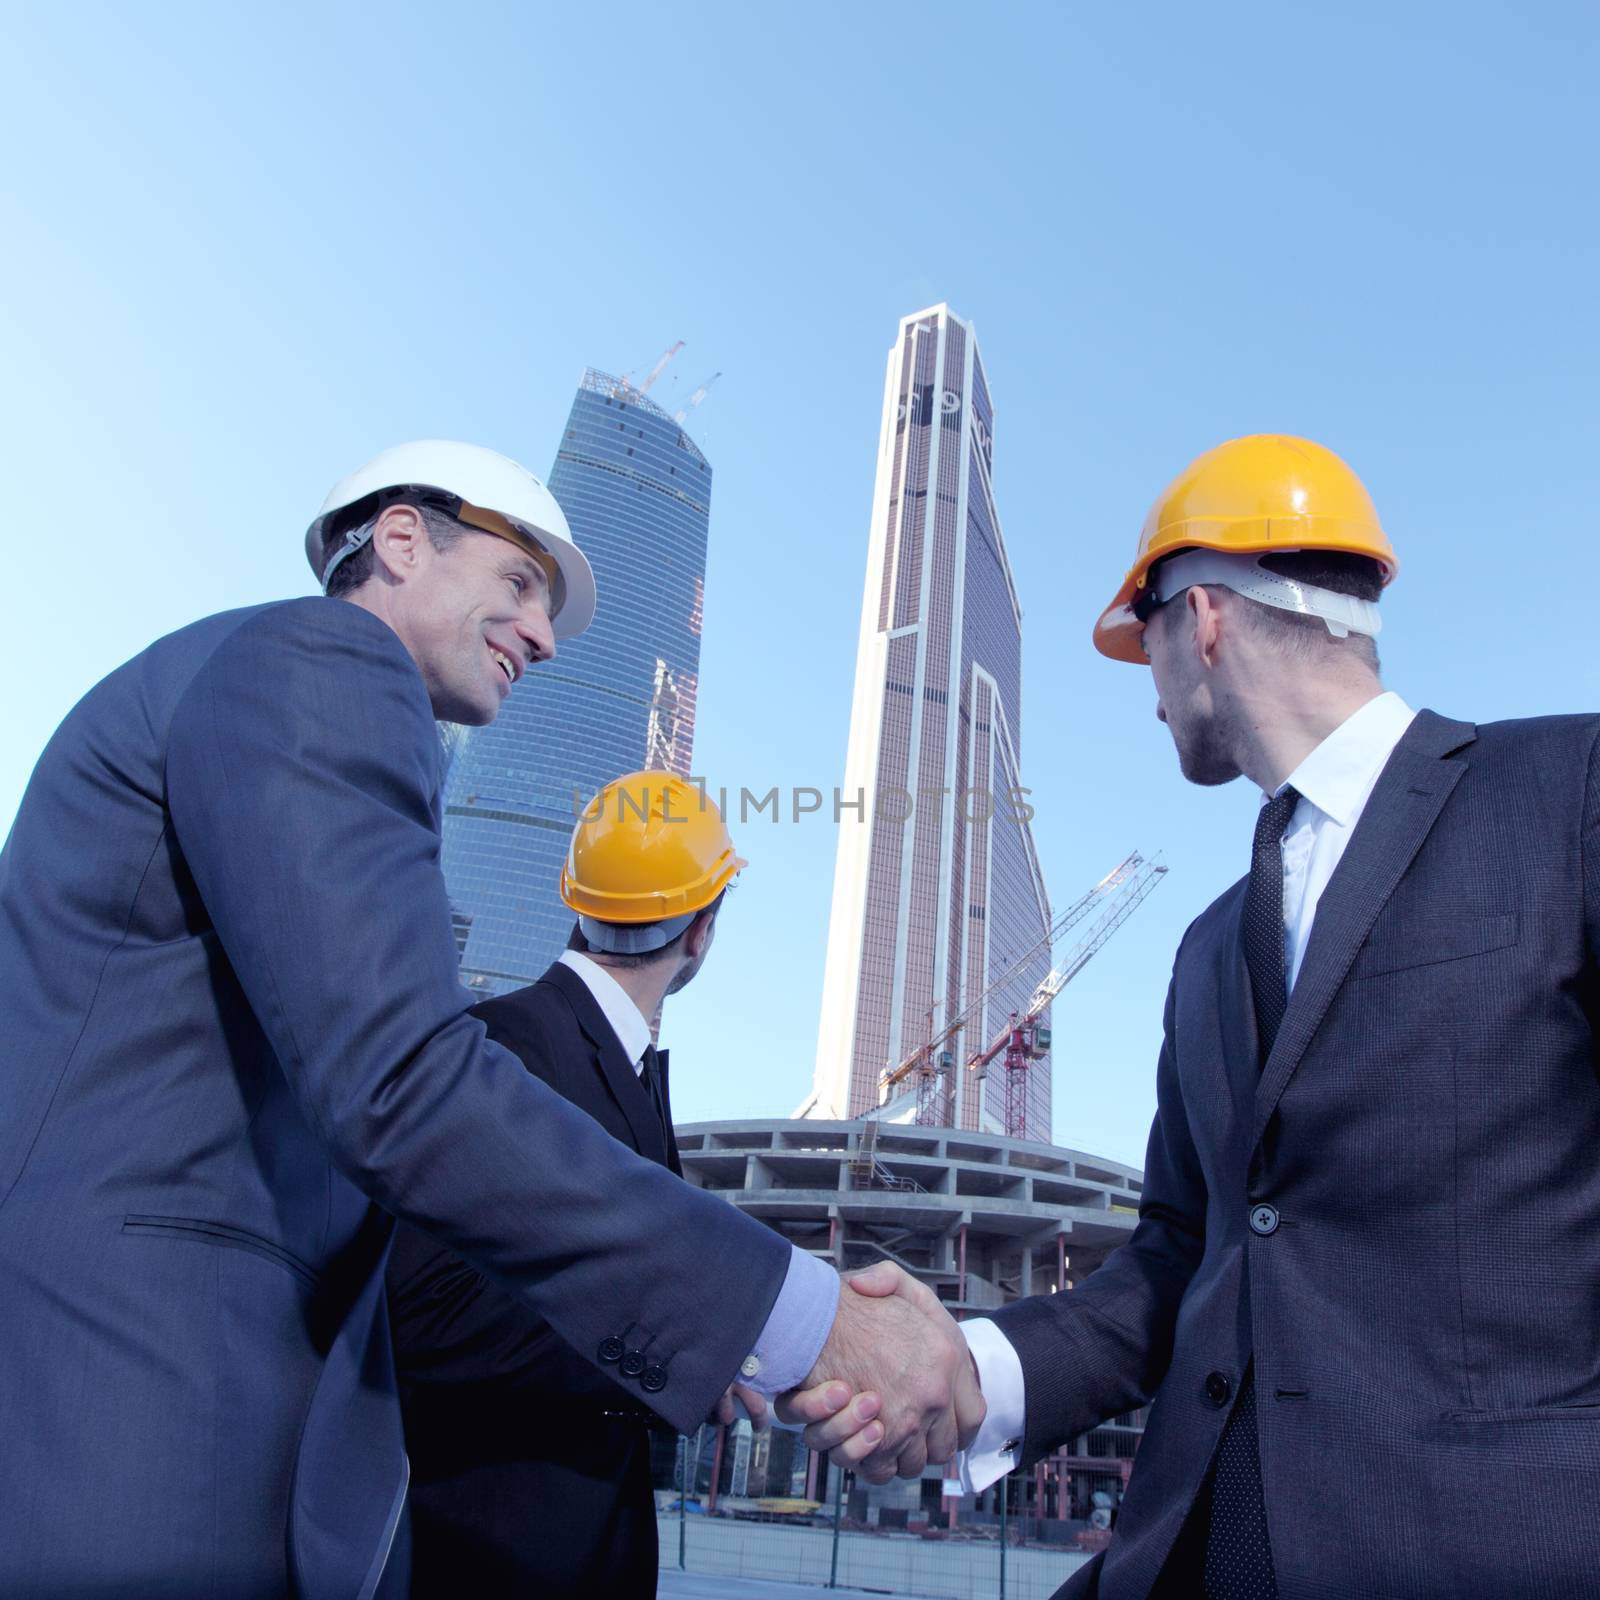 Architects wearing helmets shaking hands at skyscrapers background